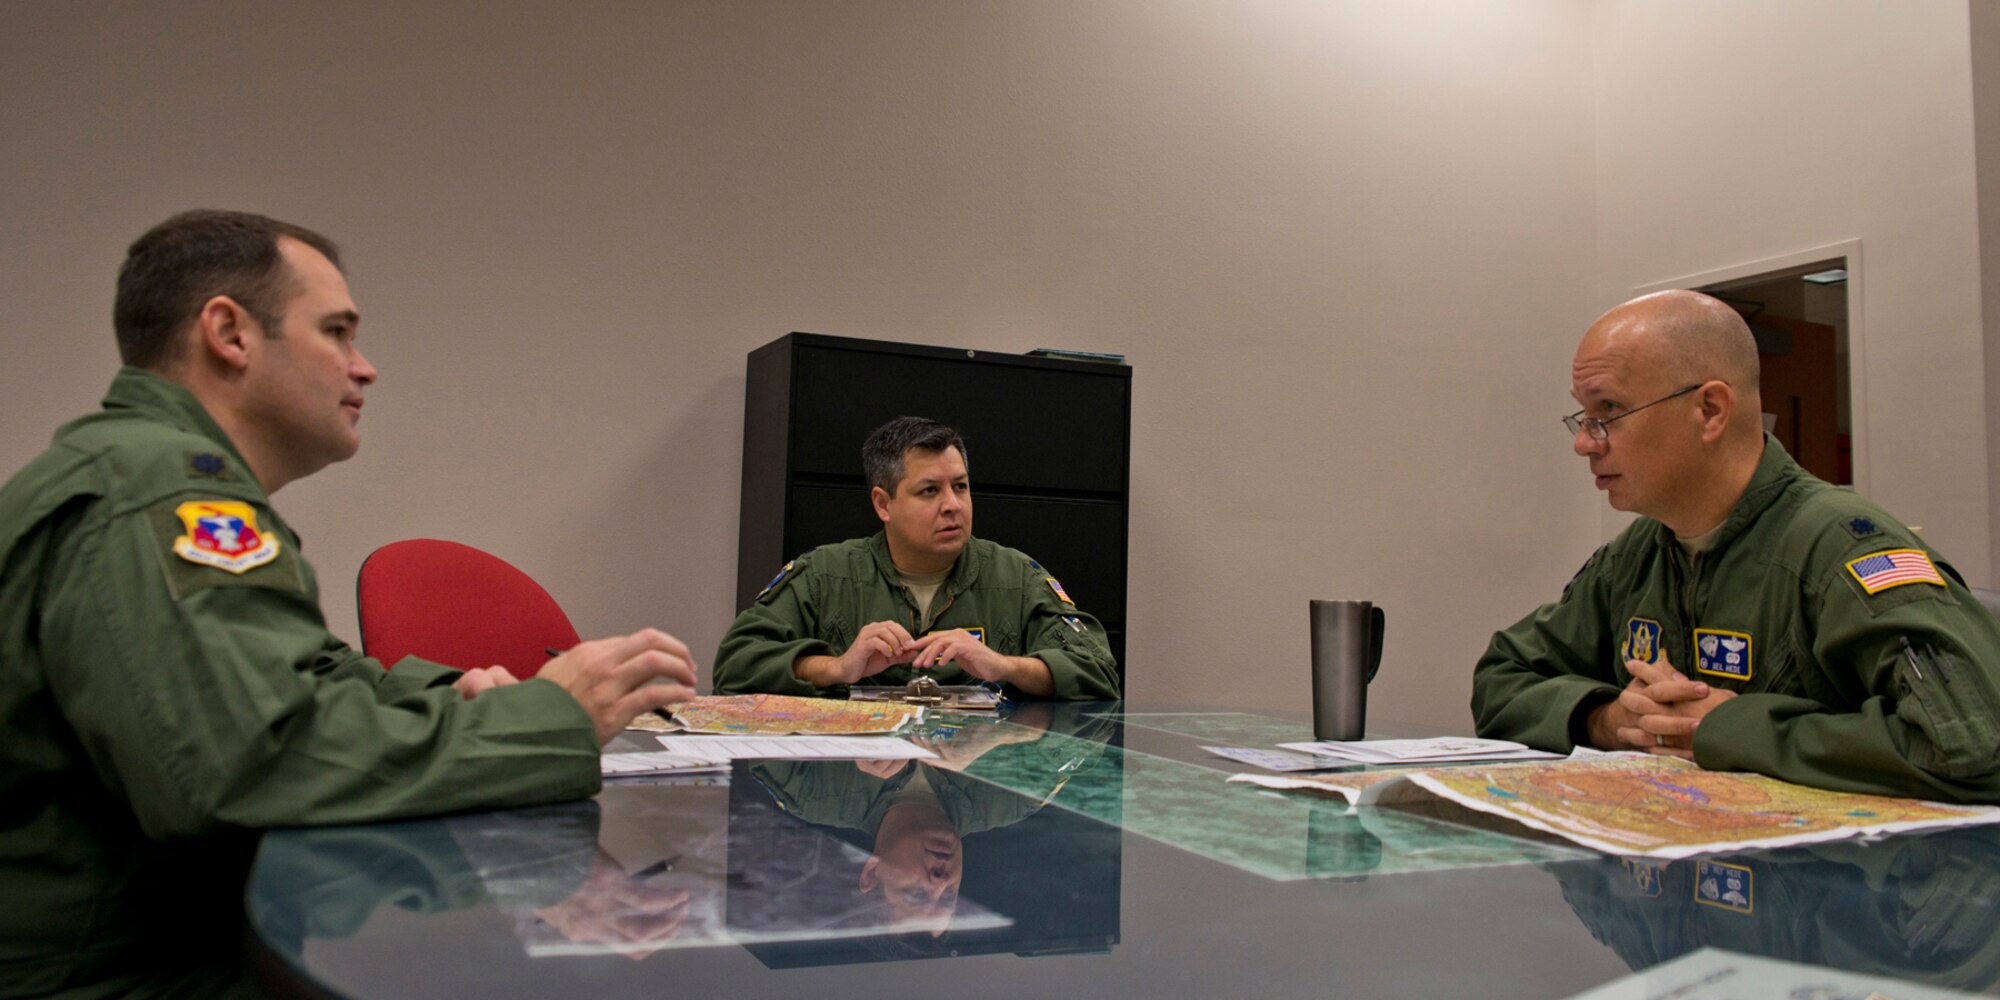 (L-R) U.S. Air Force Reserve Lt. Cols. Keith Jasmin, pilot, James Trevino, navigator and Neil Hede, pilot, conduct a pre-mission briefing prior to the last training mission flight of a C-130H assigned to the 913th Airlift Group at Little Rock Air Force Base, Ark., Jan. 28, 2016. The final two-hour mission consisted of low level air drop techniques and pilot proficiency training. (U.S. Air Force photo by Master Sgt. Jeff Walston/Released)